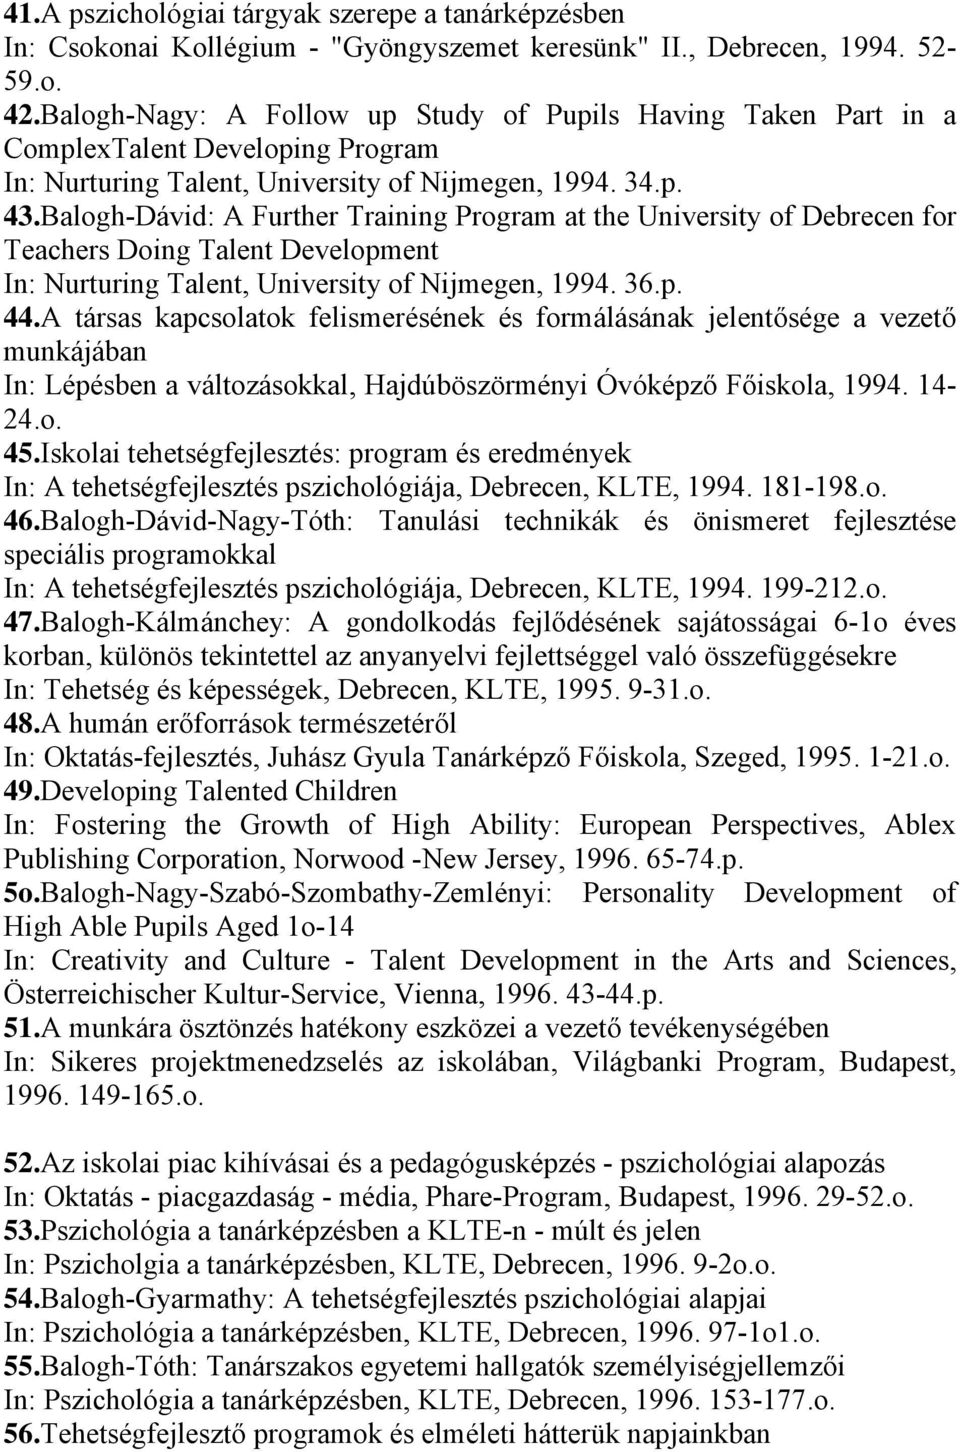 Balogh-Dávid: A Further Training Program at the University of Debrecen for Teachers Doing Talent Development In: Nurturing Talent, University of Nijmegen, 1994. 36.p. 44.